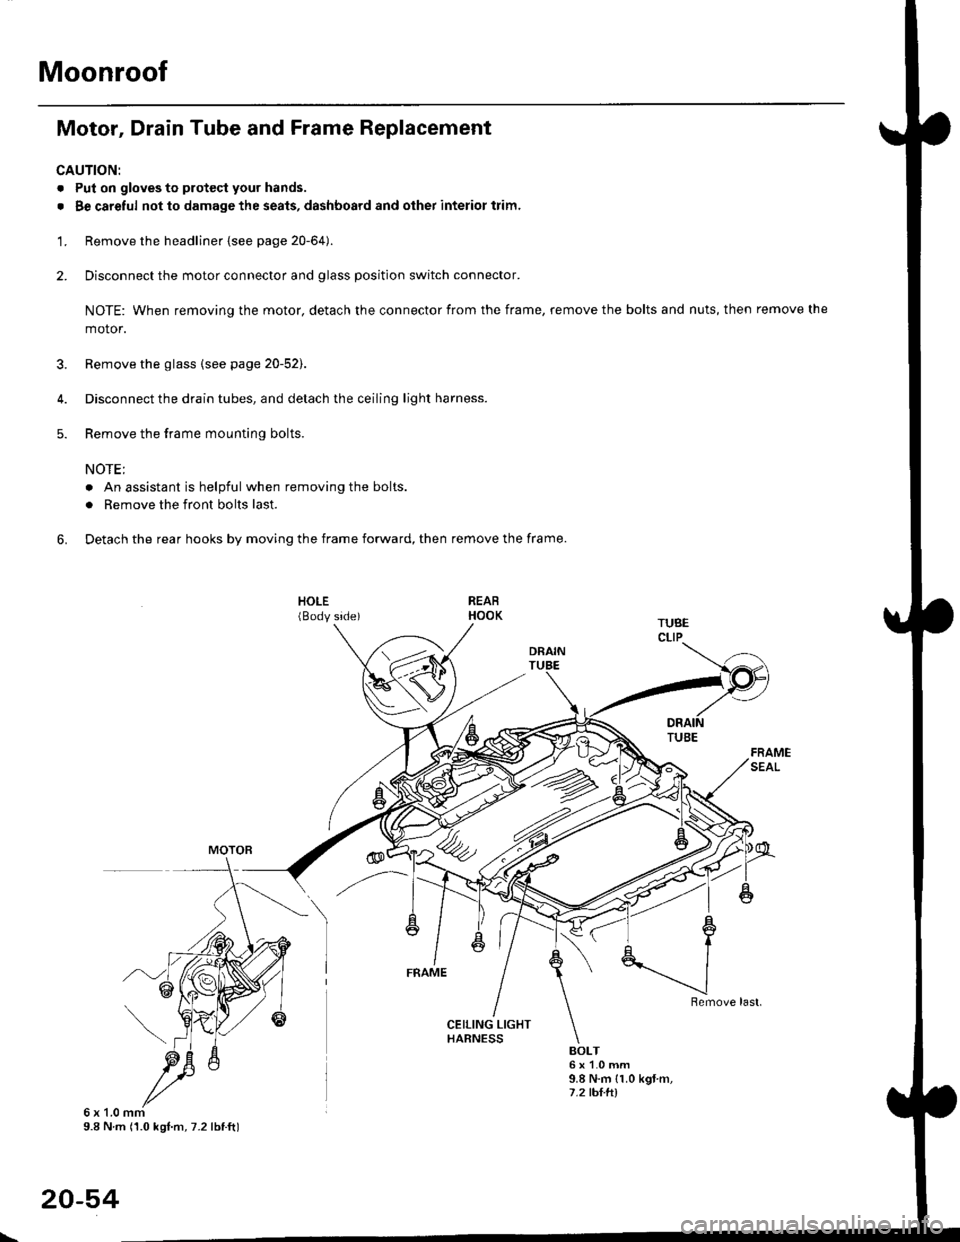 HONDA CIVIC 1997 6.G Workshop Manual Moonroof
Motor, Drain Tube and Frame Replacement
CAUTION:
. Put on gloves to protecl your hands.
. Be careful not to damage the seats, dashboard and other interior trim.
1. Remove the headliner {see 